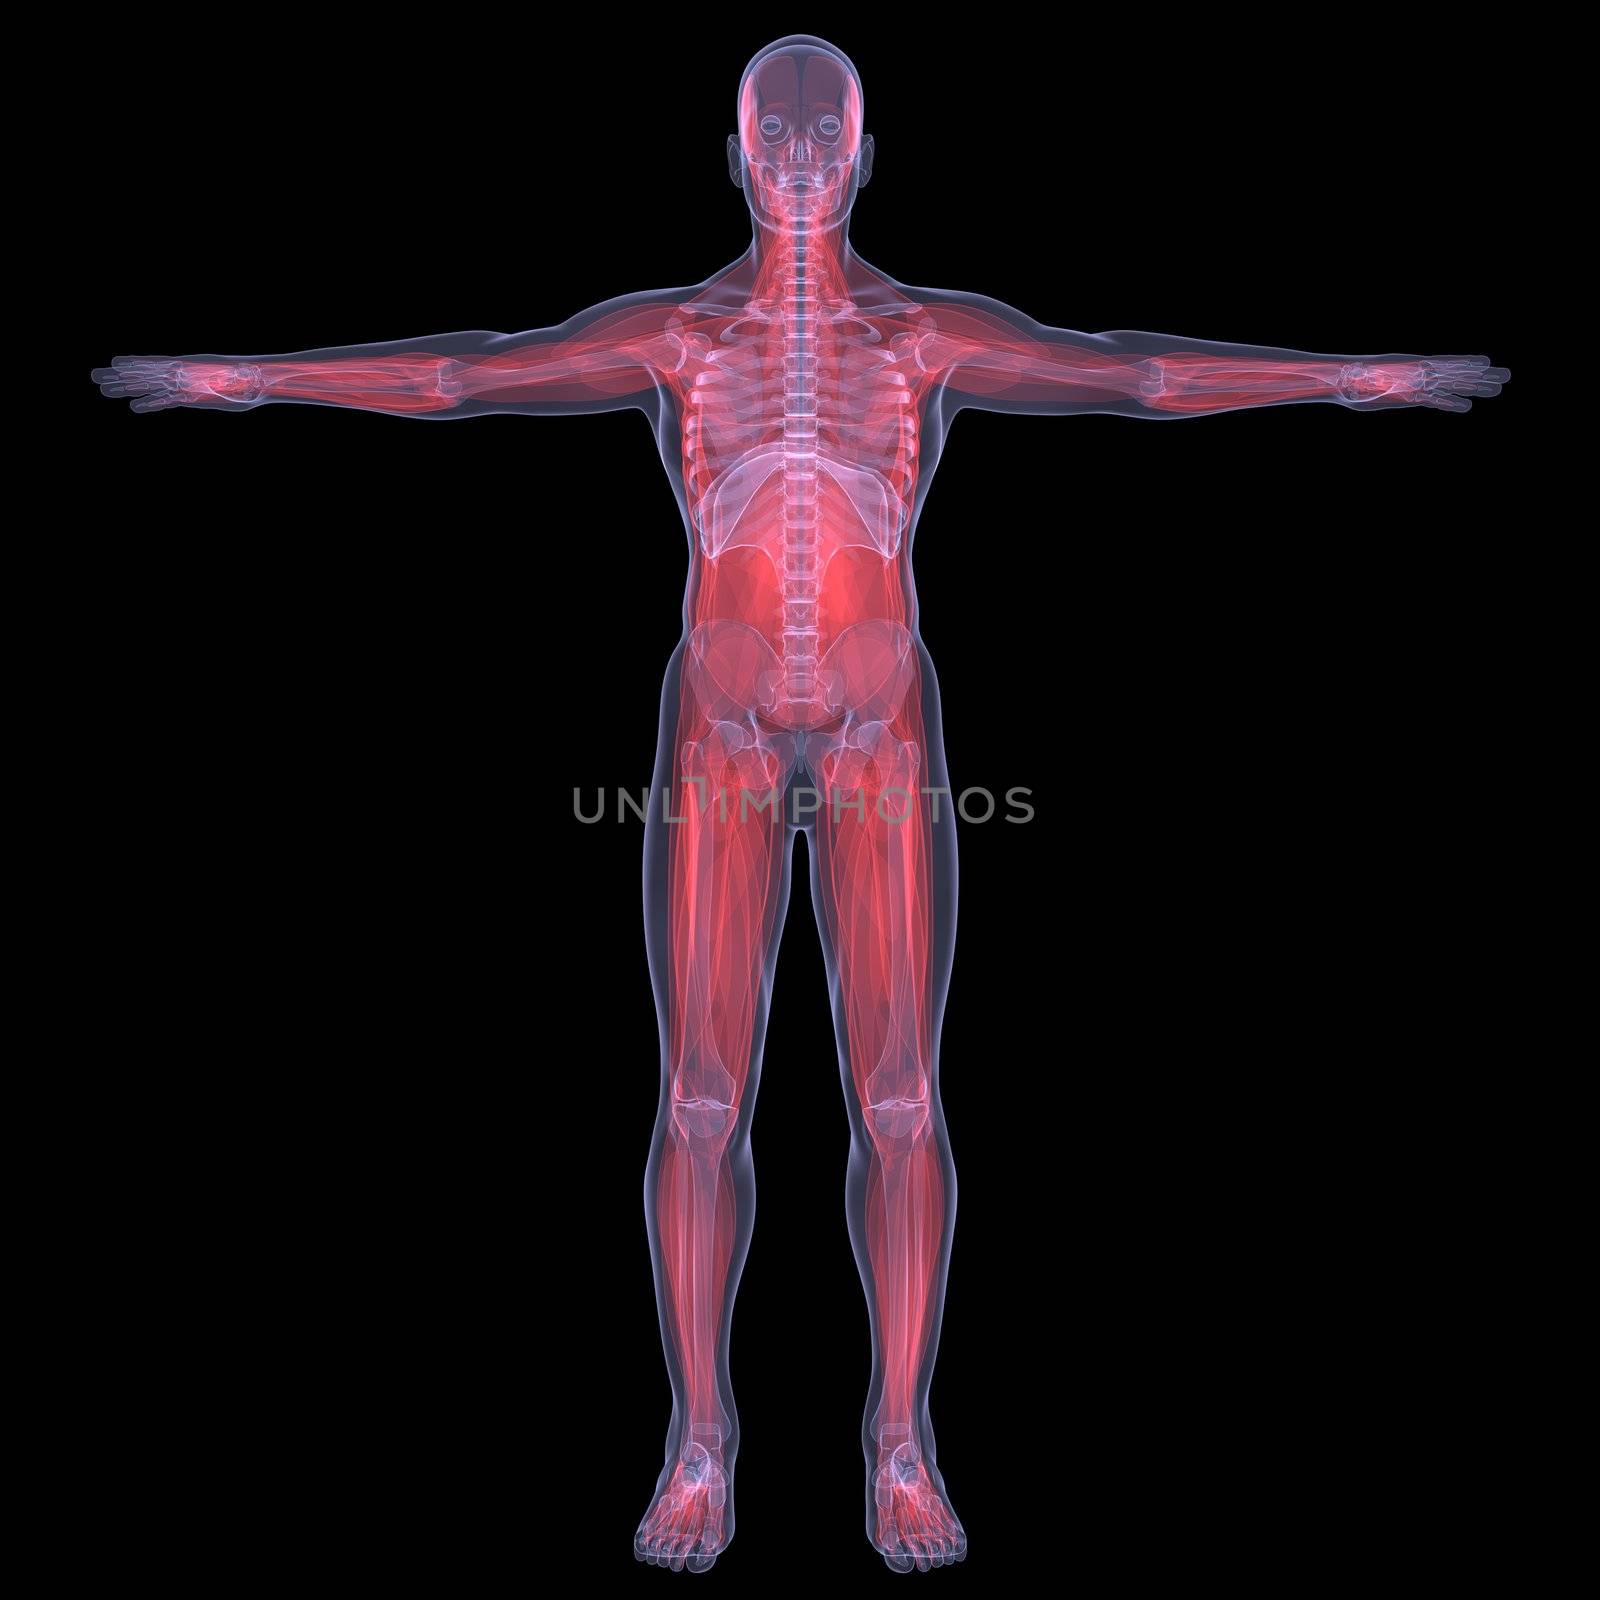 X-Ray picture of a person. muscle. Isolated render on a black background